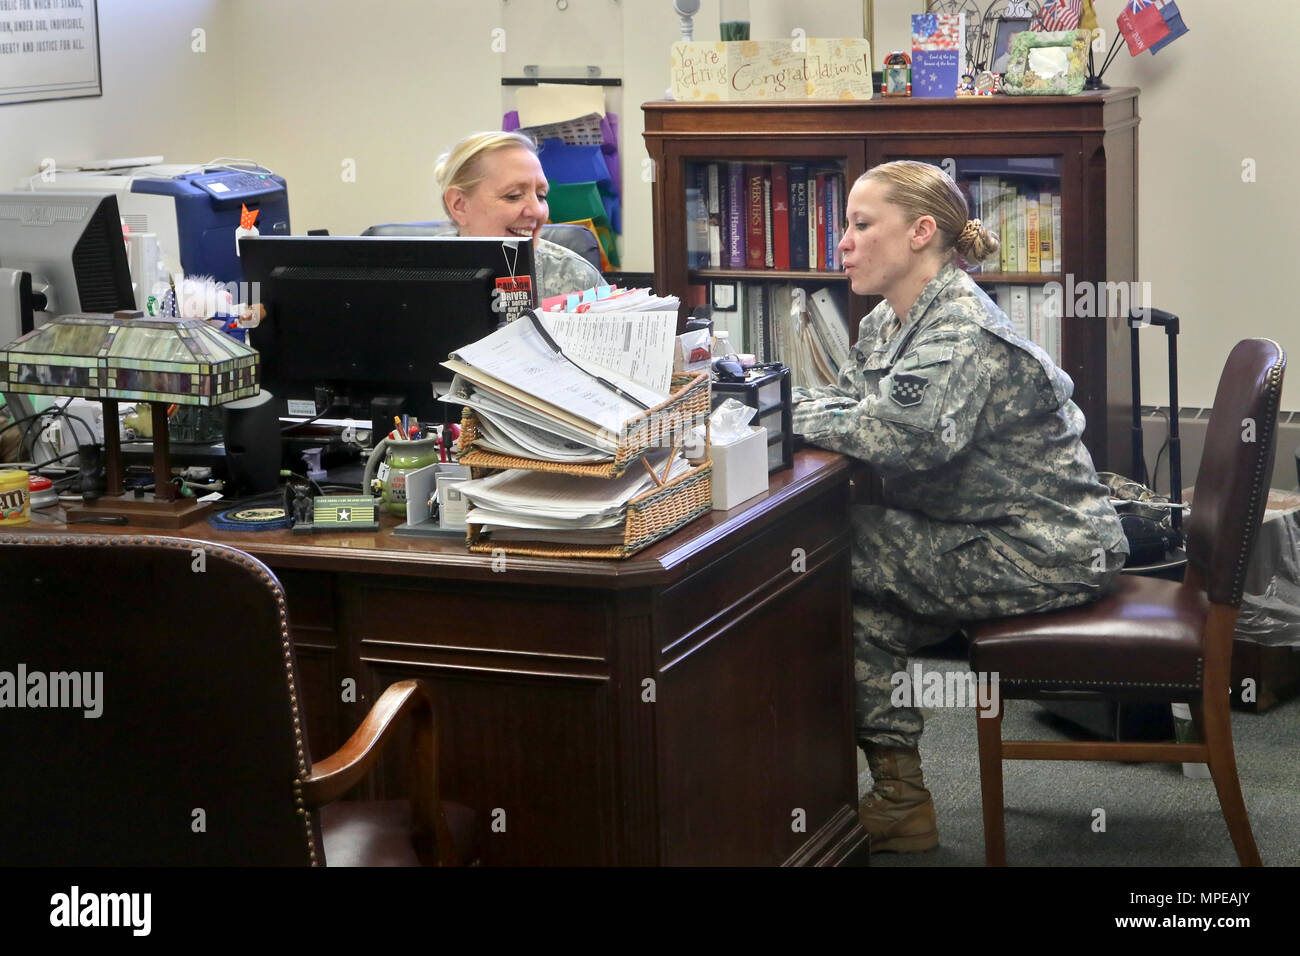 Army Sgt. 1st Class Deborah Hartman of the 318th Press Camp Headquarters speaks with Army Staff Sgt. Carrie Castillo during her last day as the unit administrator during the 318th battle assembly weekend, Forest Park, Ill., February 11, 2017. (U.S Army photo by Sgt. Alfonso Corral) Stock Photo